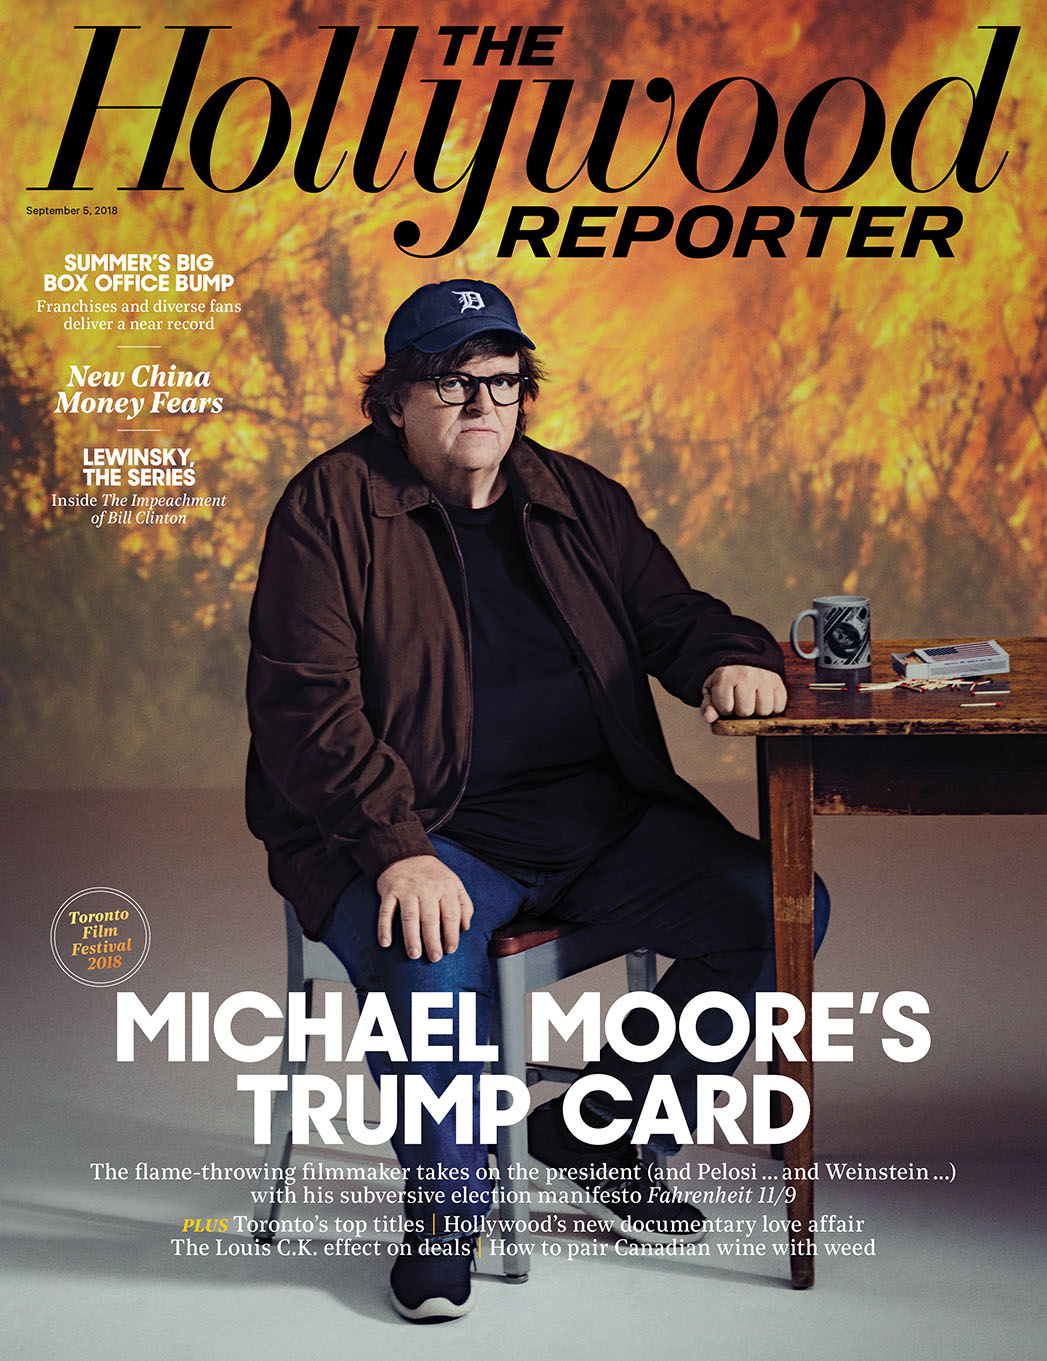 thr_issue_29_michael_moore_cover.jpg